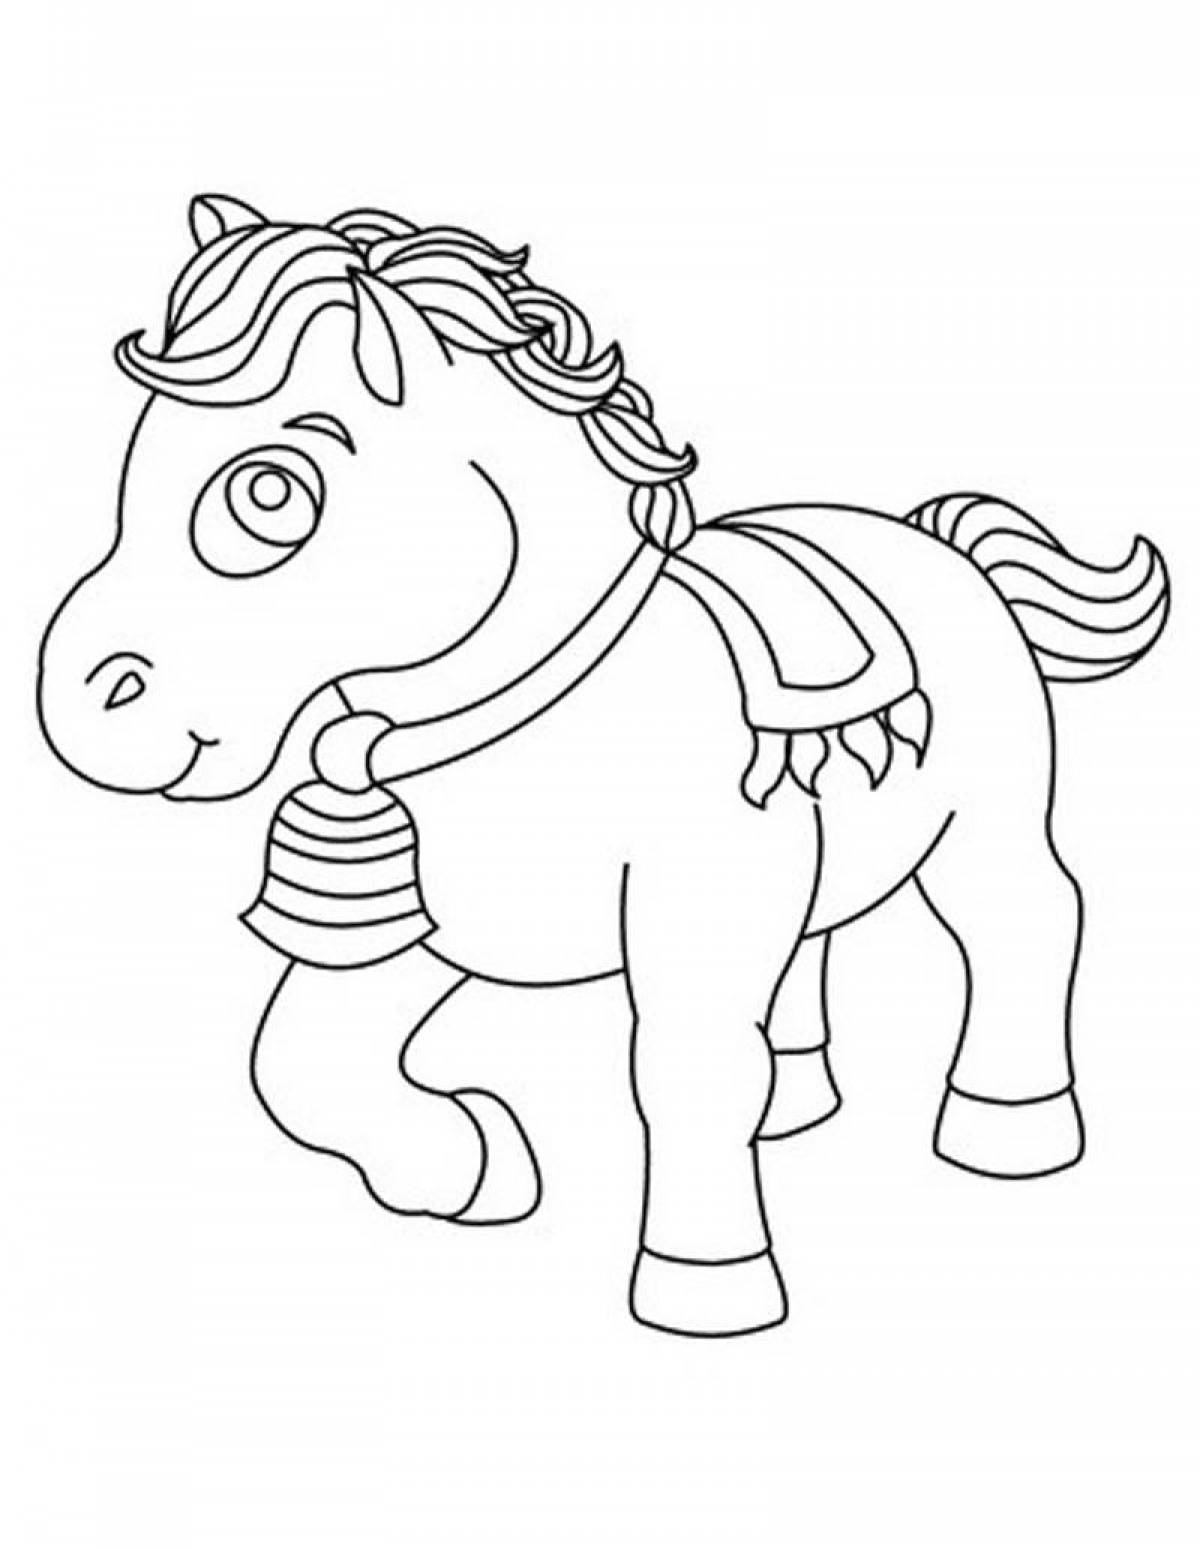 Live horse coloring book for 3-4 year olds